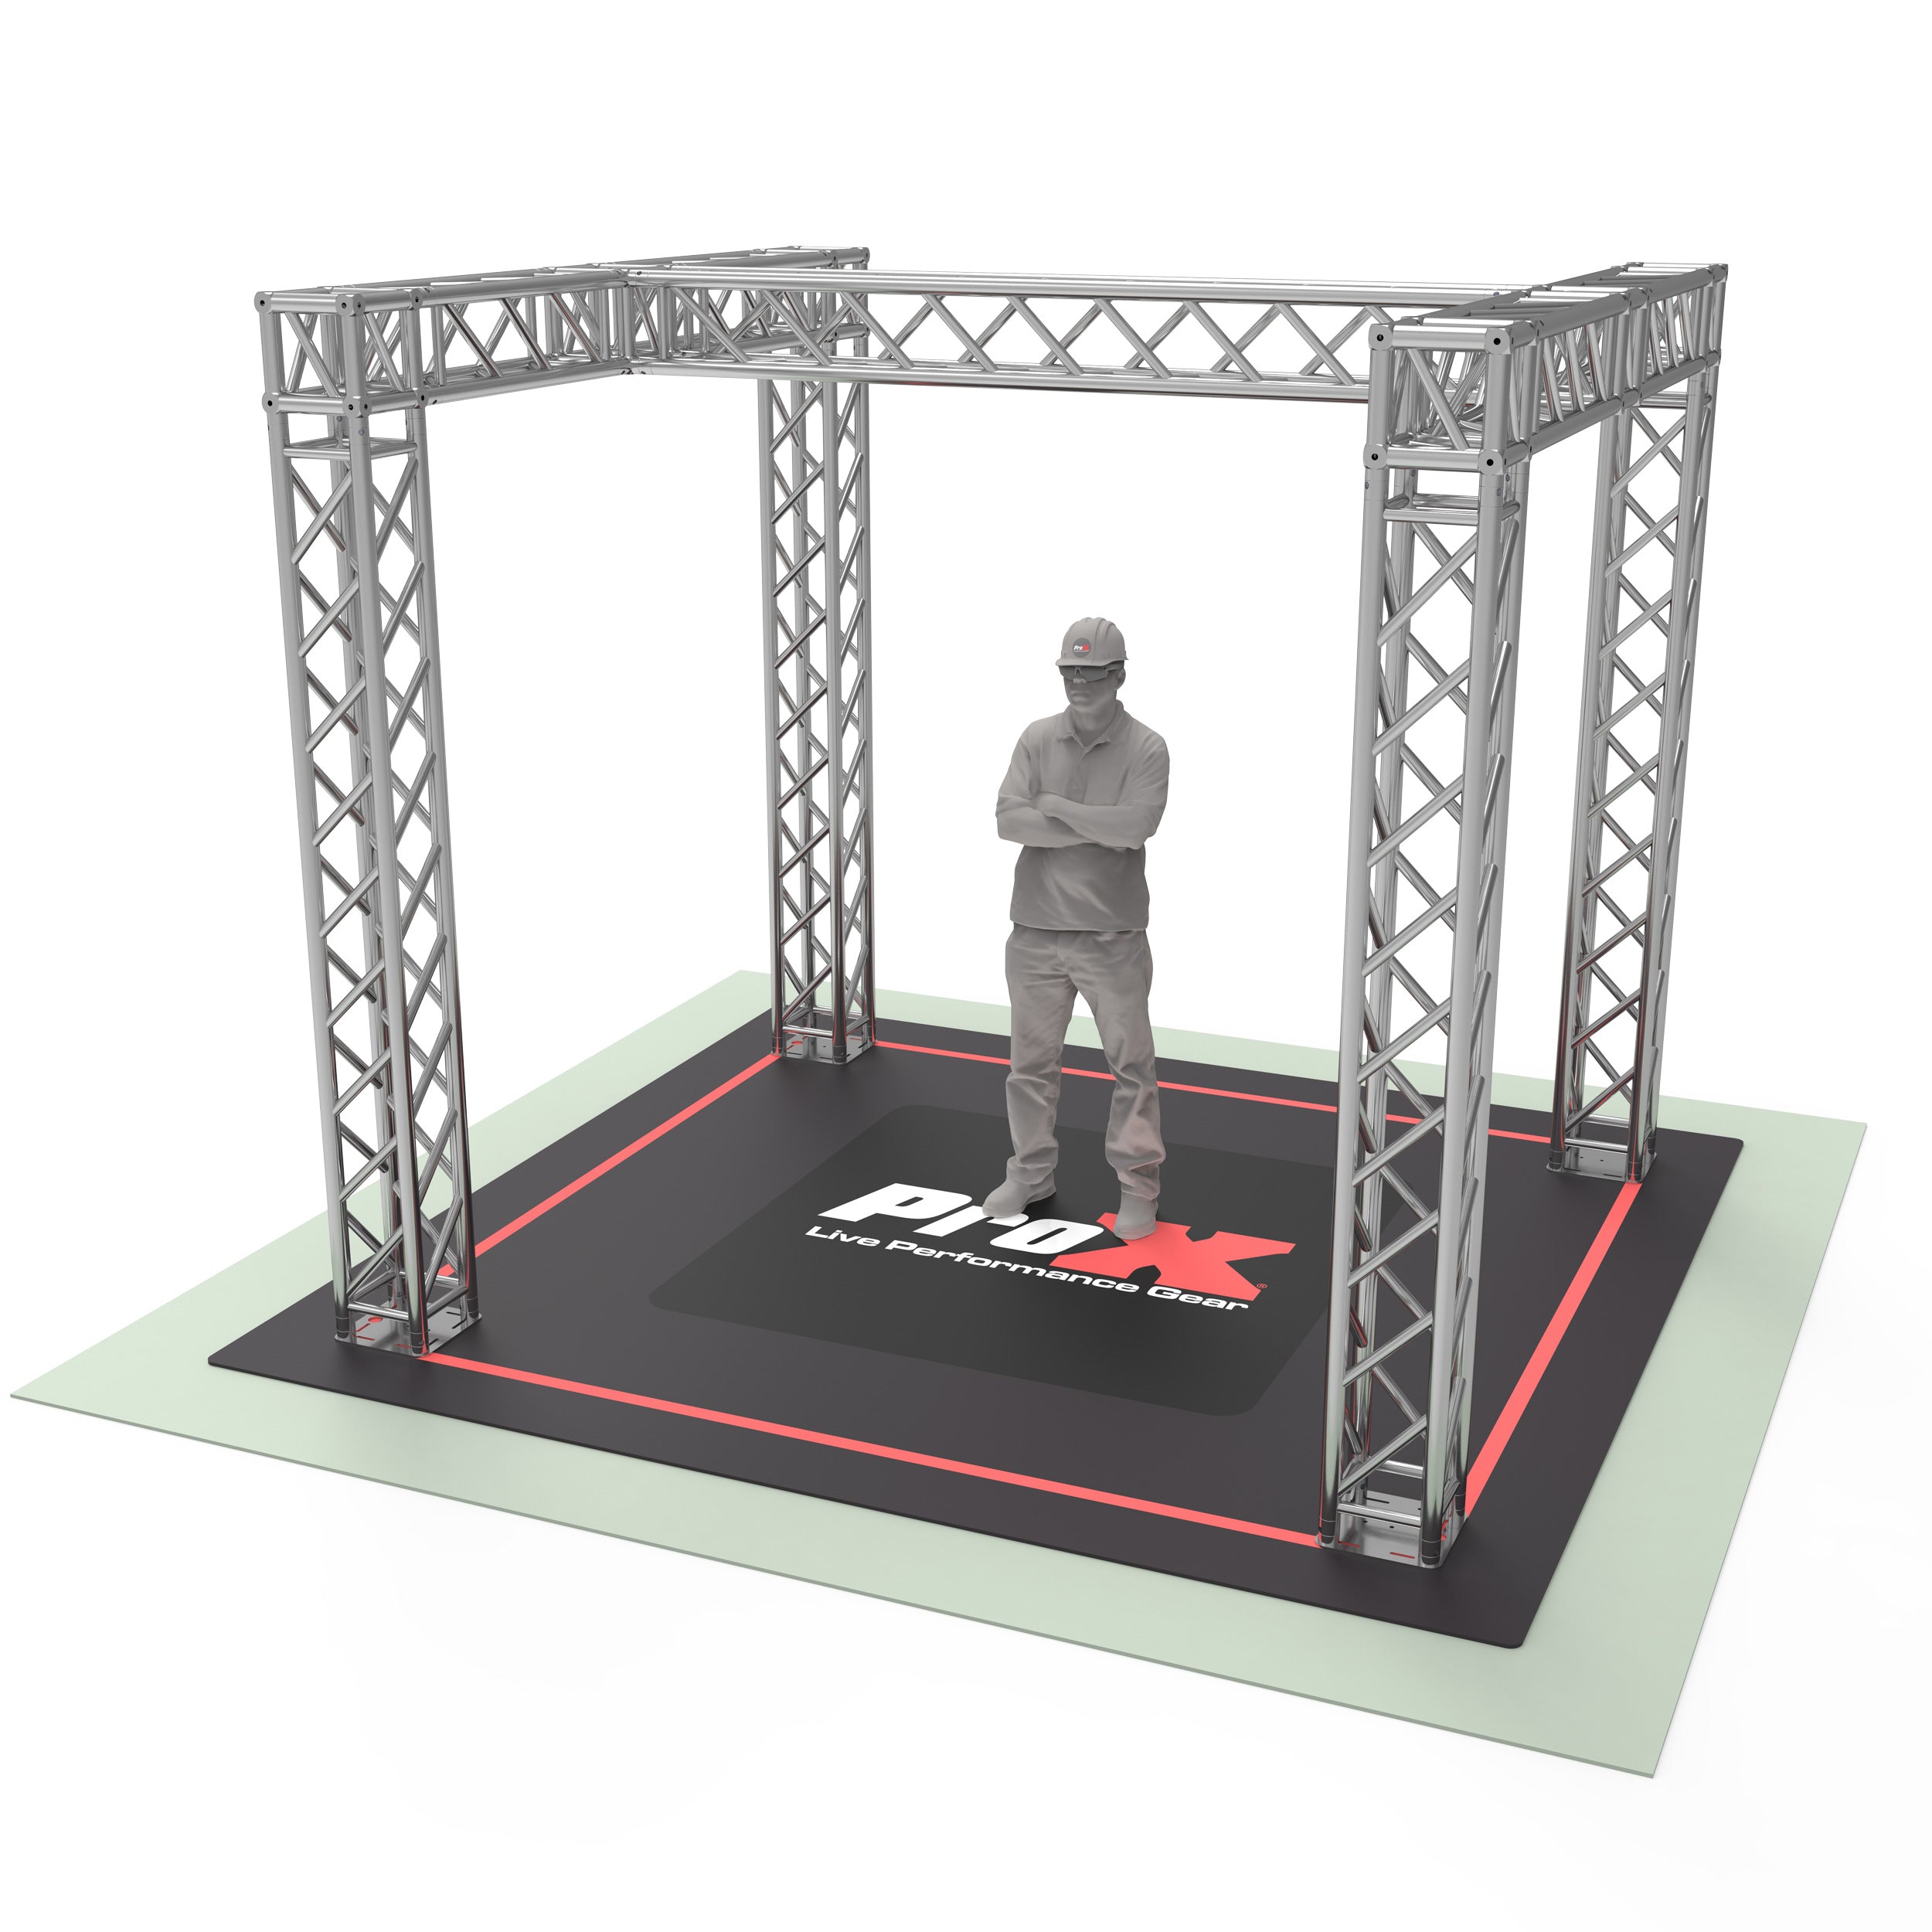 Pro X Tradeshow Booth 10.11 W X 9.42 L X 9.20 FT H with H Shape Design in center - 2mm Heavy Duty Truss XTP-E1099H